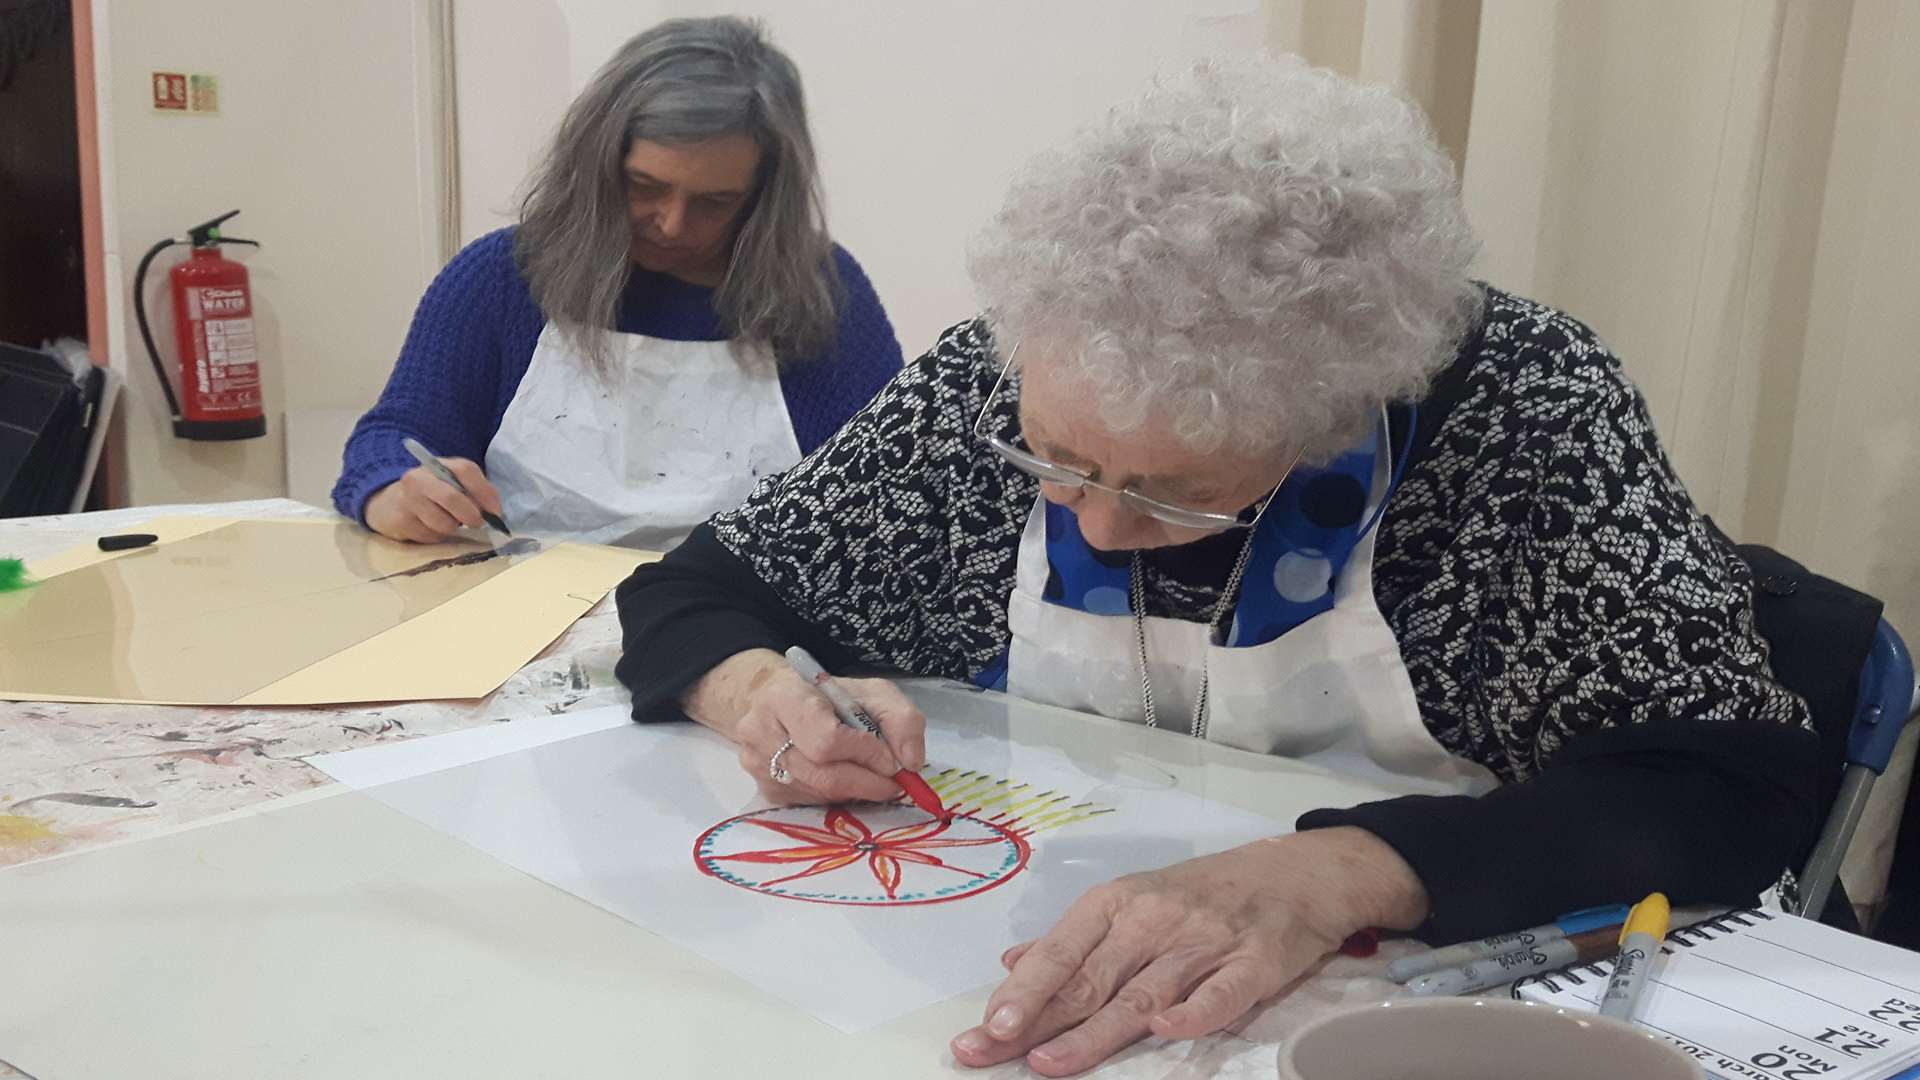 Members of the Gravesend Art group working on their current project.